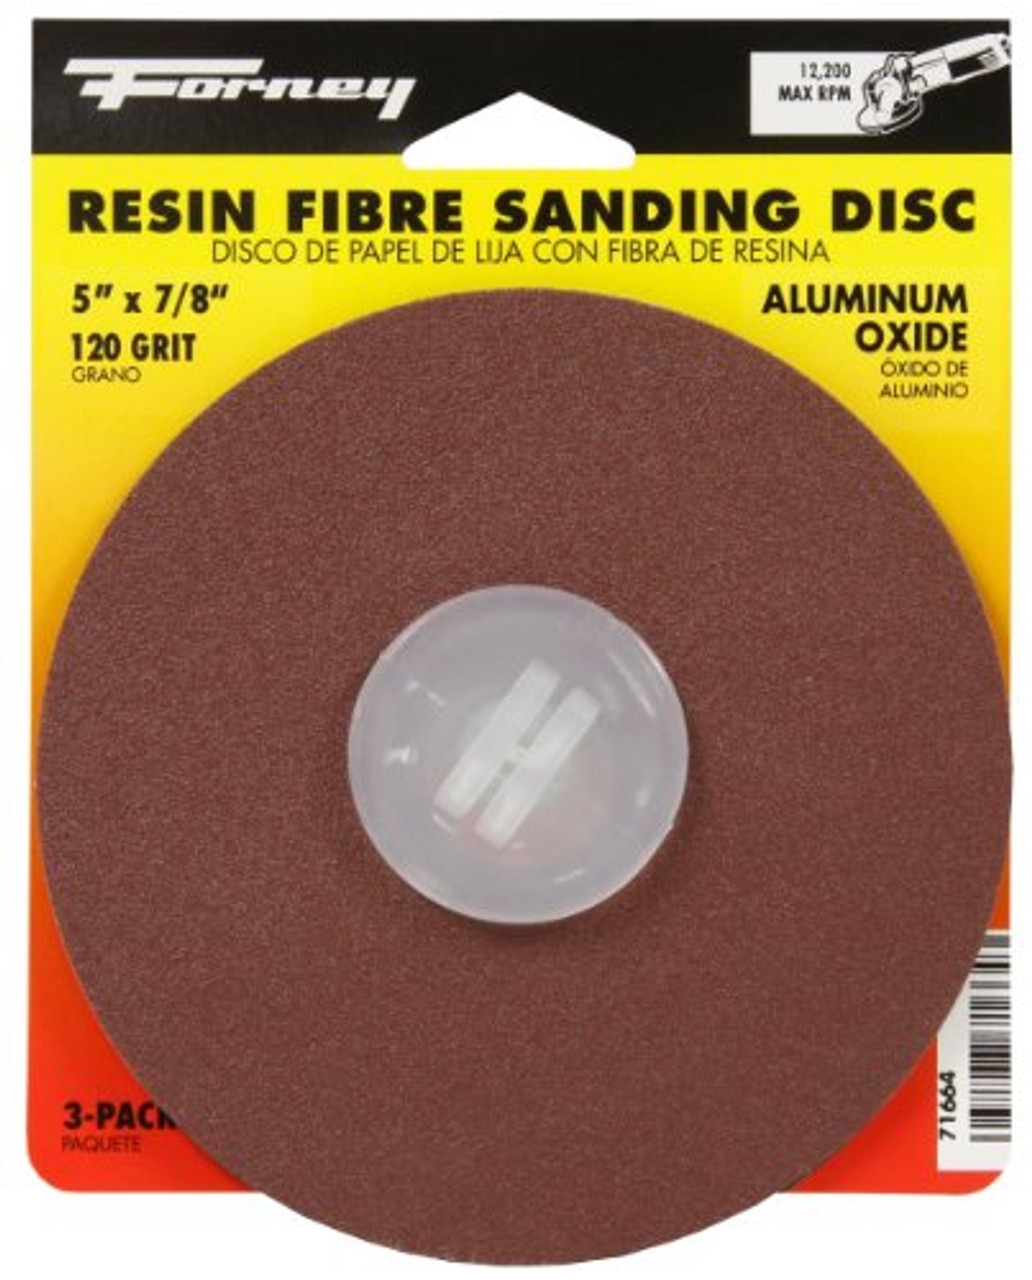 Forney (71664) Sanding Discs, Aluminum Oxide with 7/8-Inch Arbor, 5-Inch, 120-Grit, 3-Pack